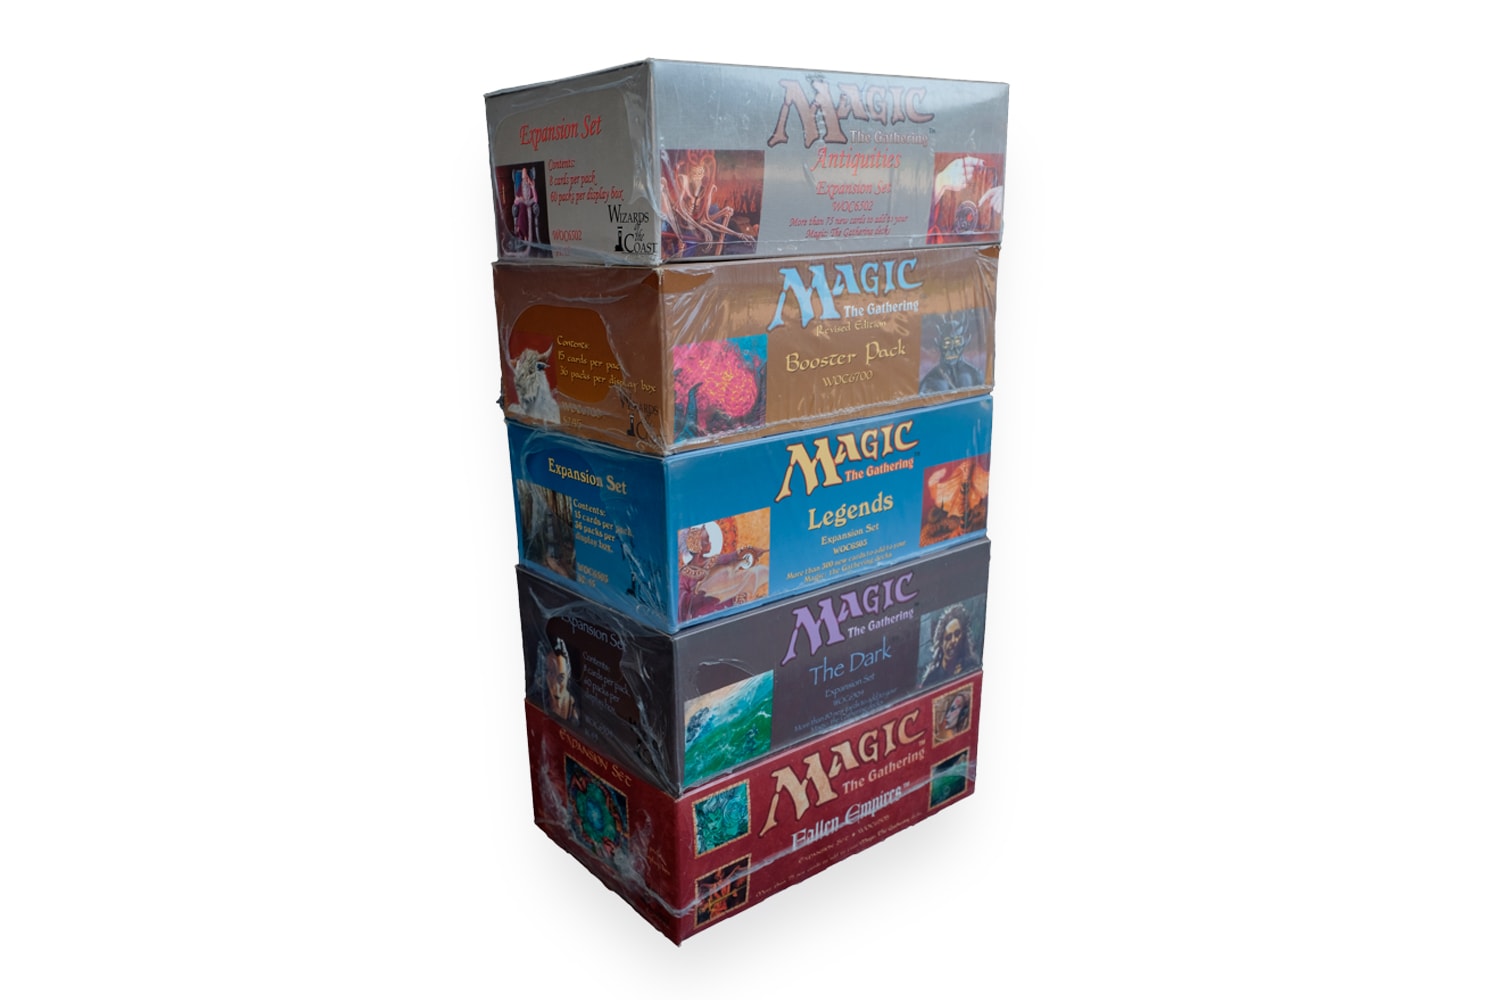 Mythic Markets Magic: The Gathering 94 Booster Box Set Purchase IPO info What is it How Money Antiquities Revised core Legends The Dark Fallen Empires Expansion Sets